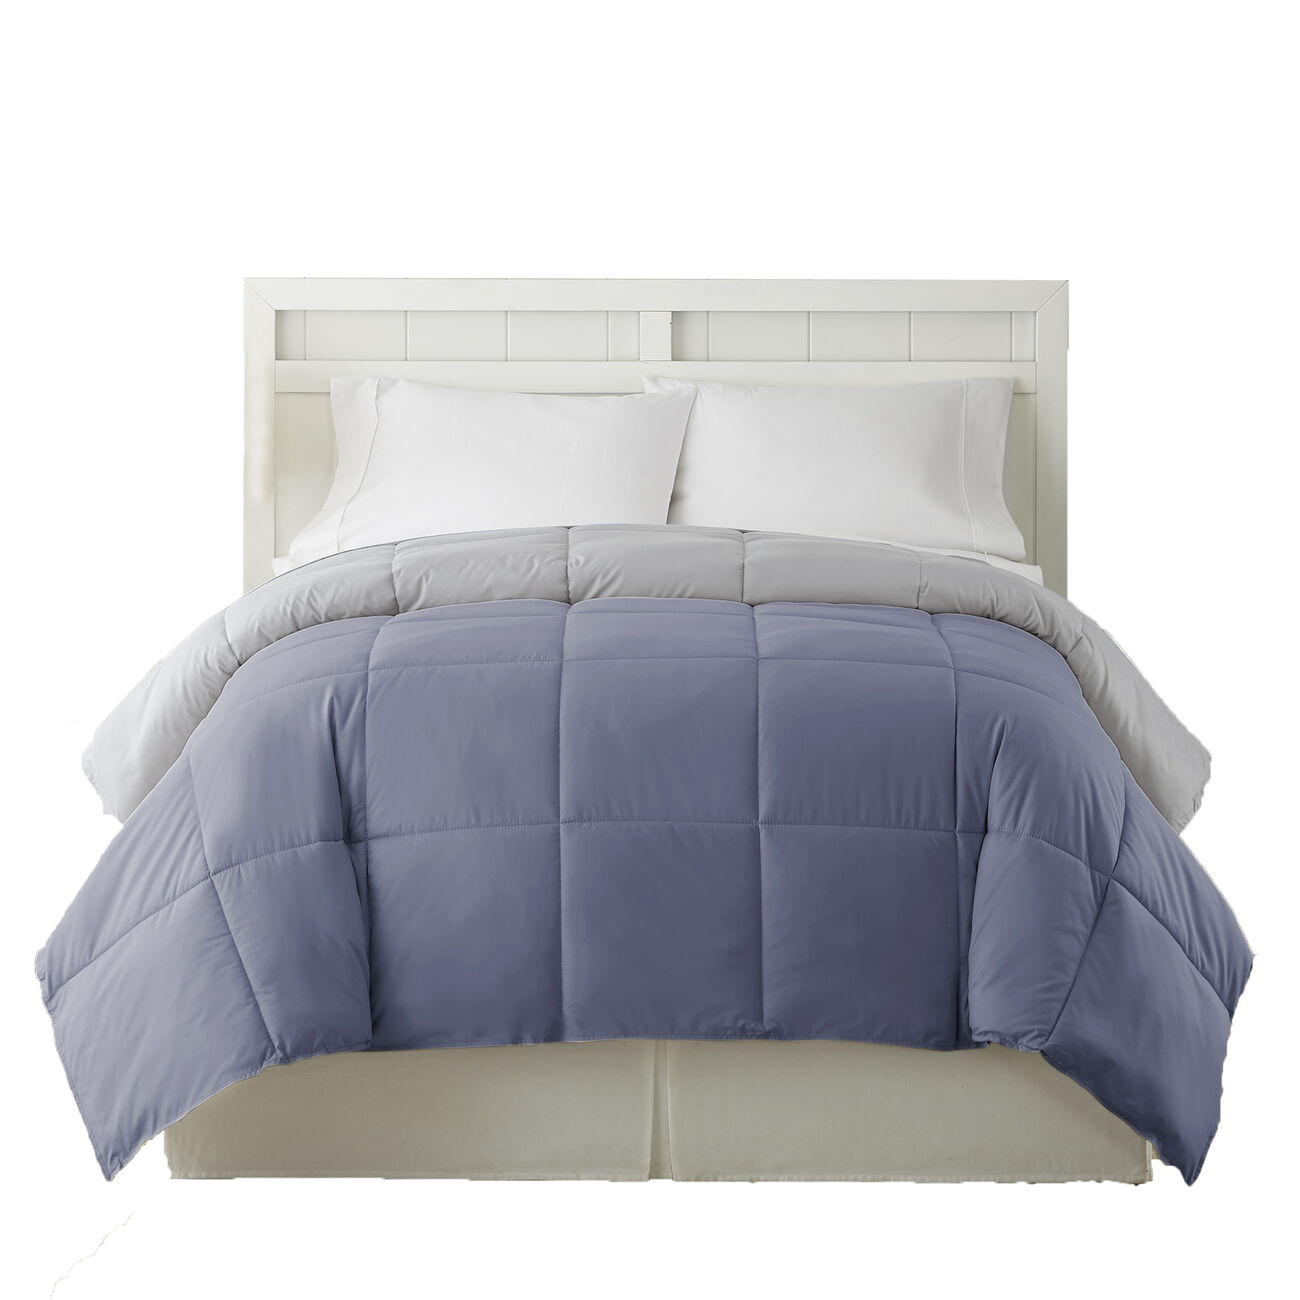 Genoa Reversible King Comforter with Box Quilted The Urban Port, Silver and Blue